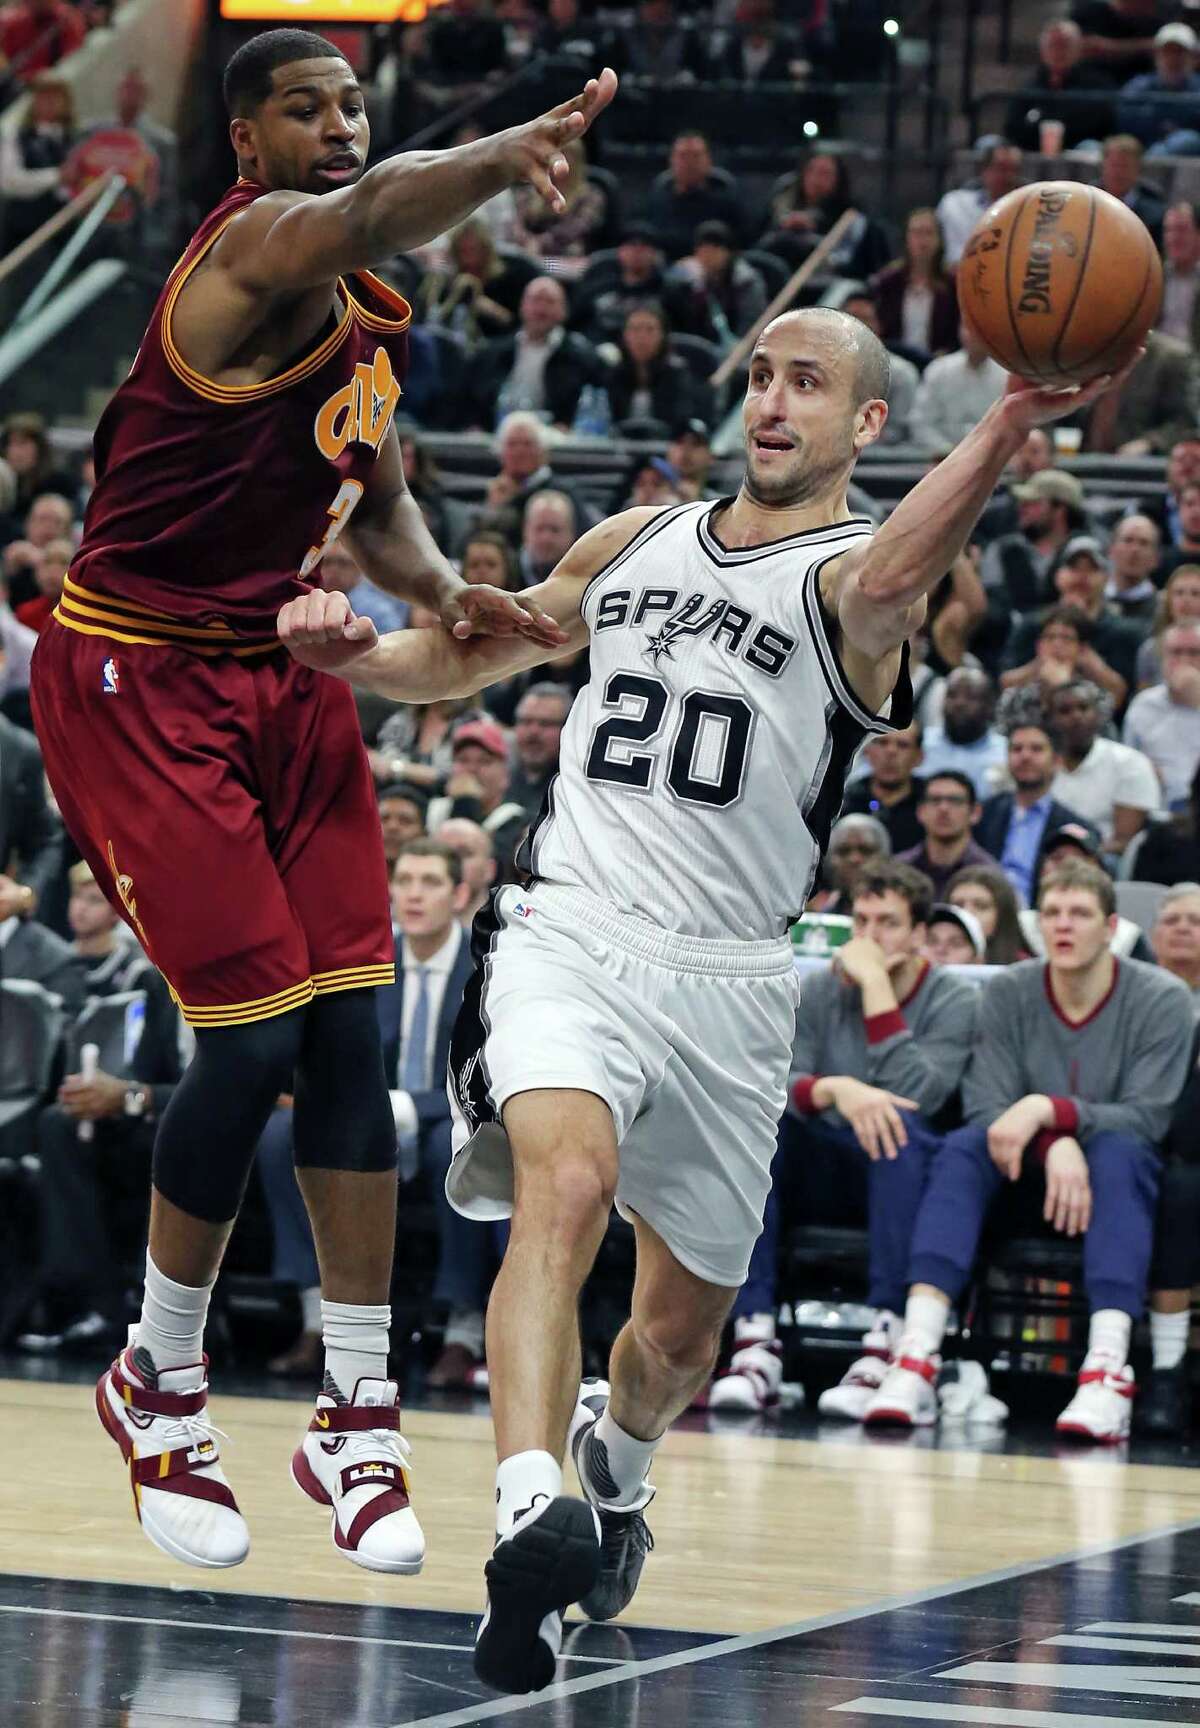 Spurs’ Manu Ginobili pass around Cleveland Cavaliers’ Tristan Thompson during second half action on Jan. 14, 2016 at the AT&T Center. The Spurs won 99-95.